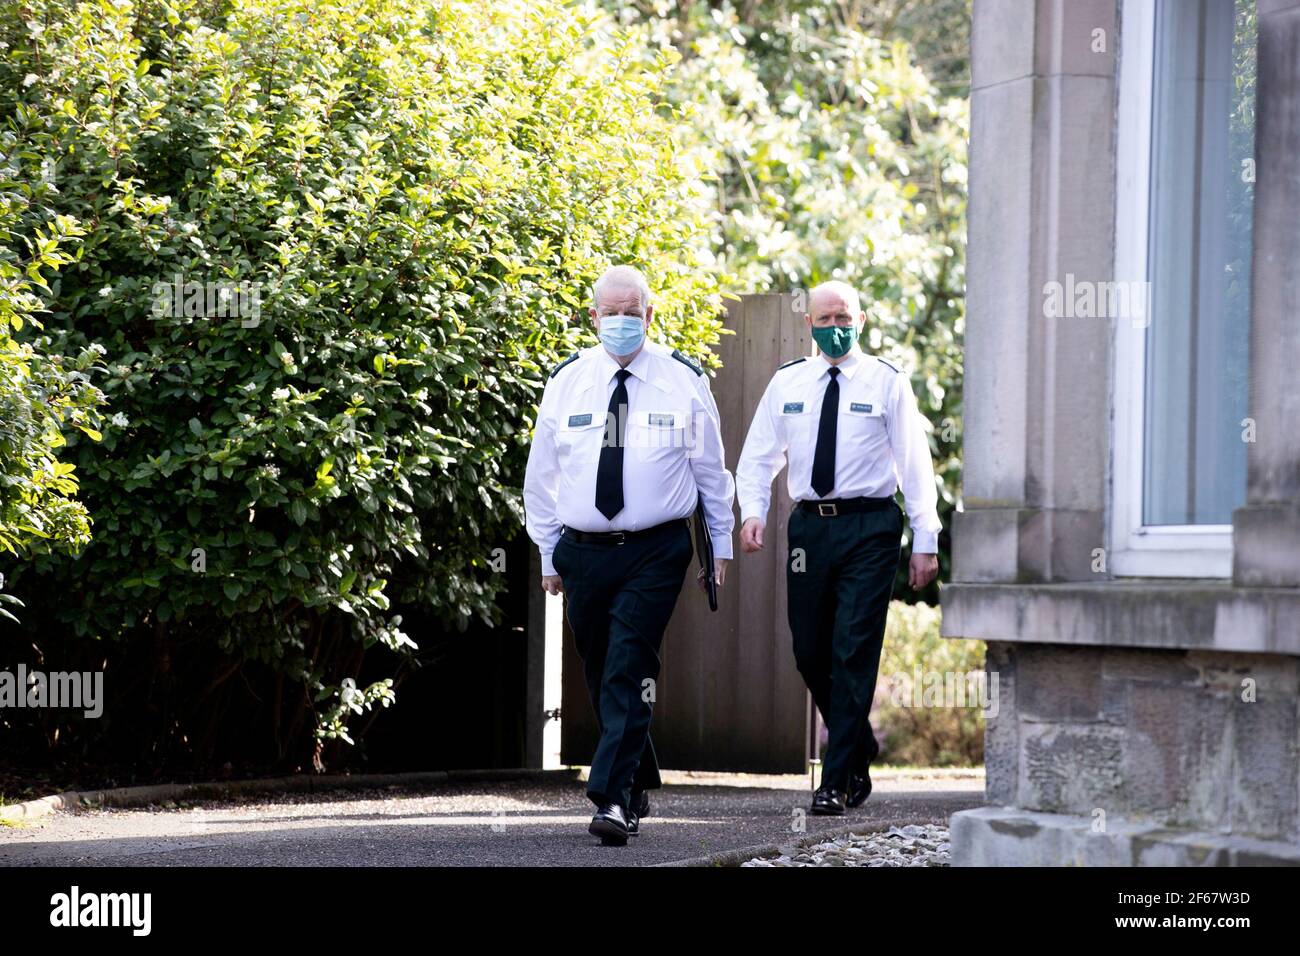 RETRANSMITTING AMENDING THE NAME BRYNE TO BYRNE. PSNI Chief Constable Simon Byrne (left) and Assistant Chief Constable Alan Todd before a press conference to give reaction to the findings of the Public Prosecution Service (PPS) has not recommended prosecution for anyone concerned in relation to the funeral of prominent Irish Republican Bobby Storey in west Belfast on 30 June 2020. The funeral attracted 2,000 mourners at a time when only 30 people were permitted at public gatherings. Stock Photo